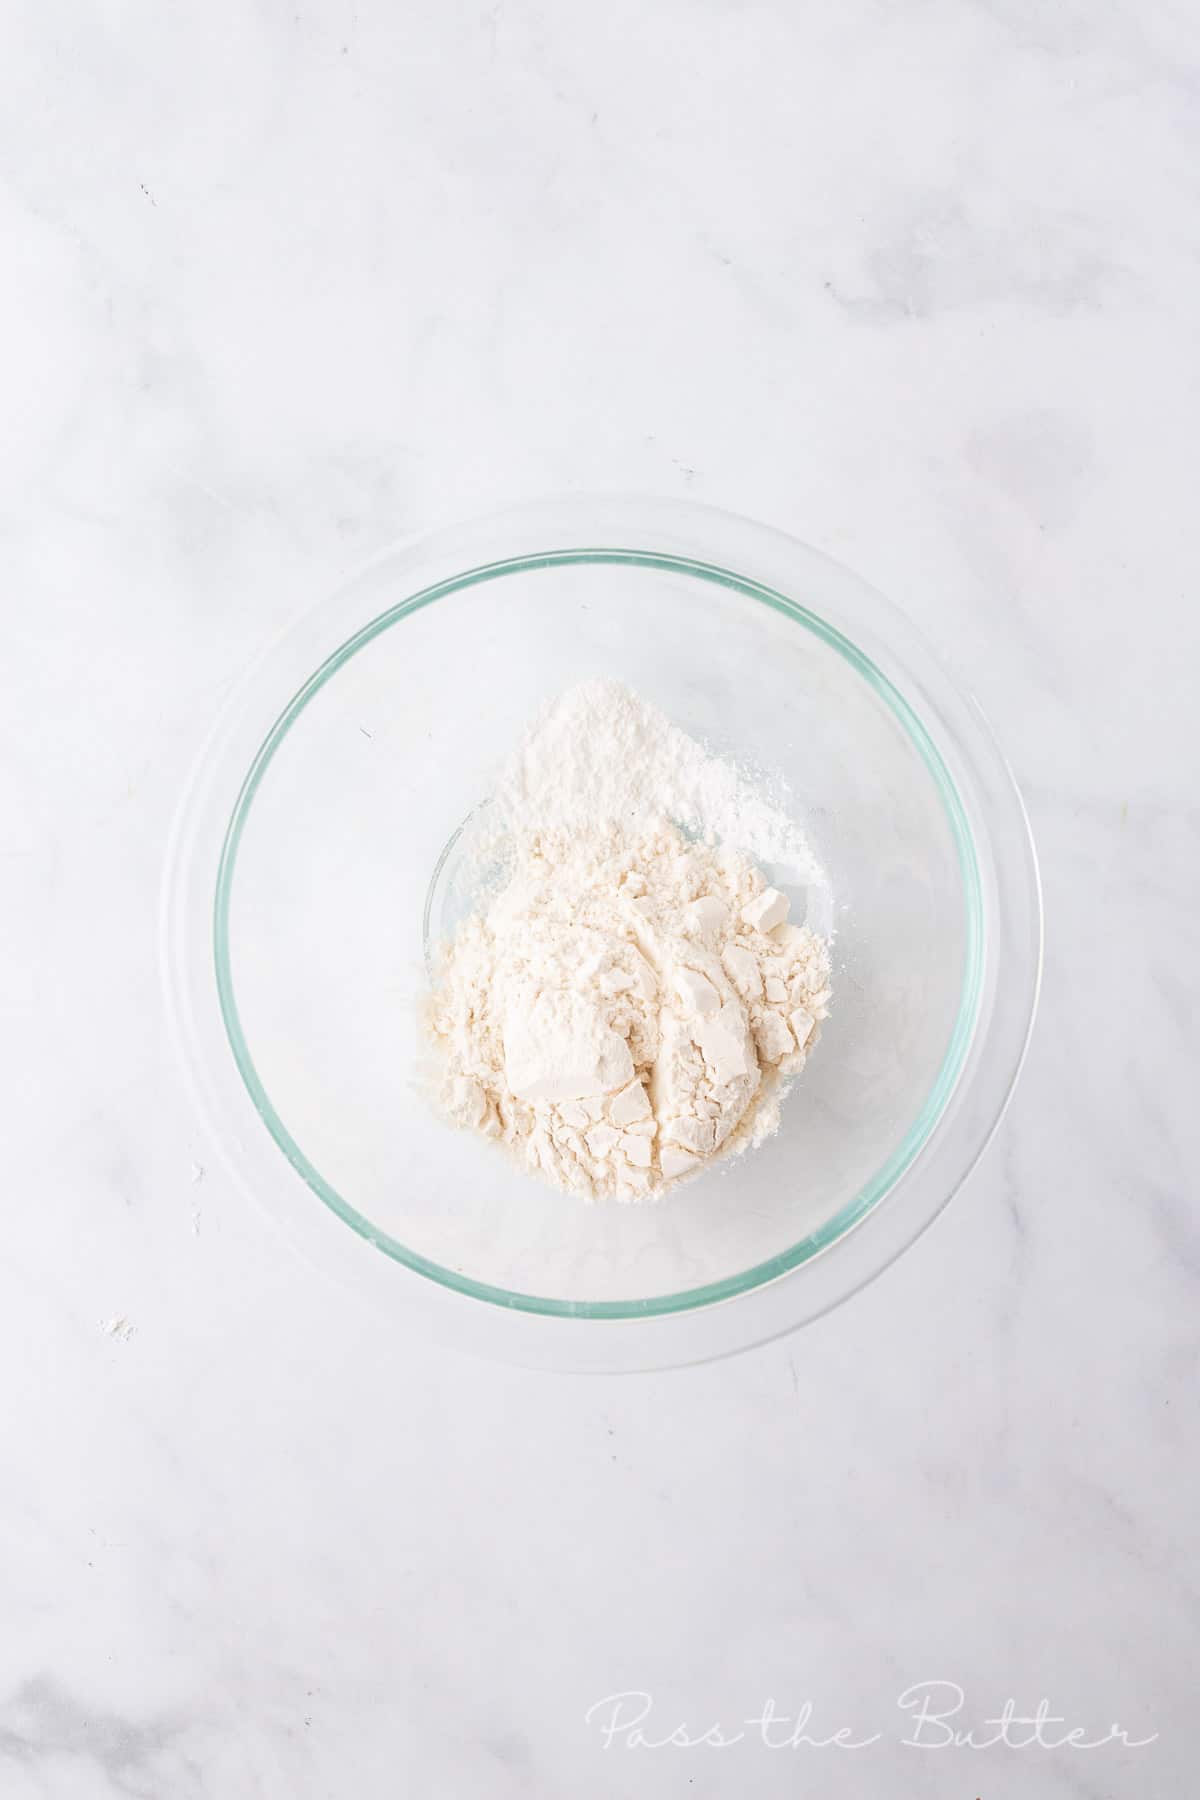 Combine flour, baking powder and salt in a small bowl